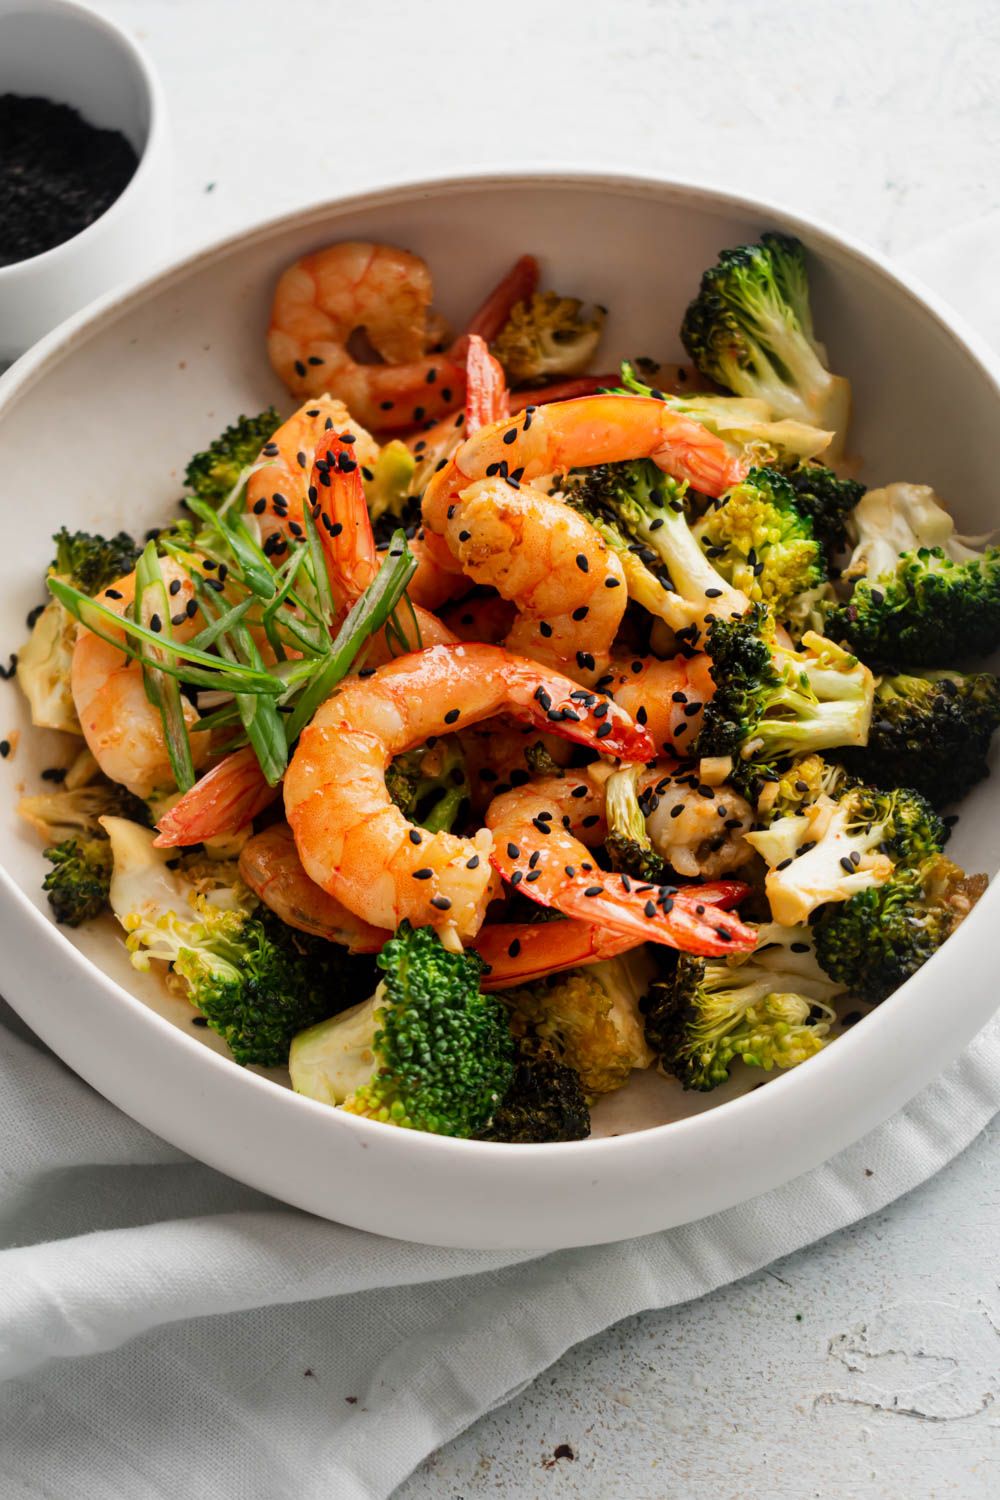 Firecracker shrimp in a slightly spicy sauce served with broccoli, green onions, and black sesame seeds in a white bowl.